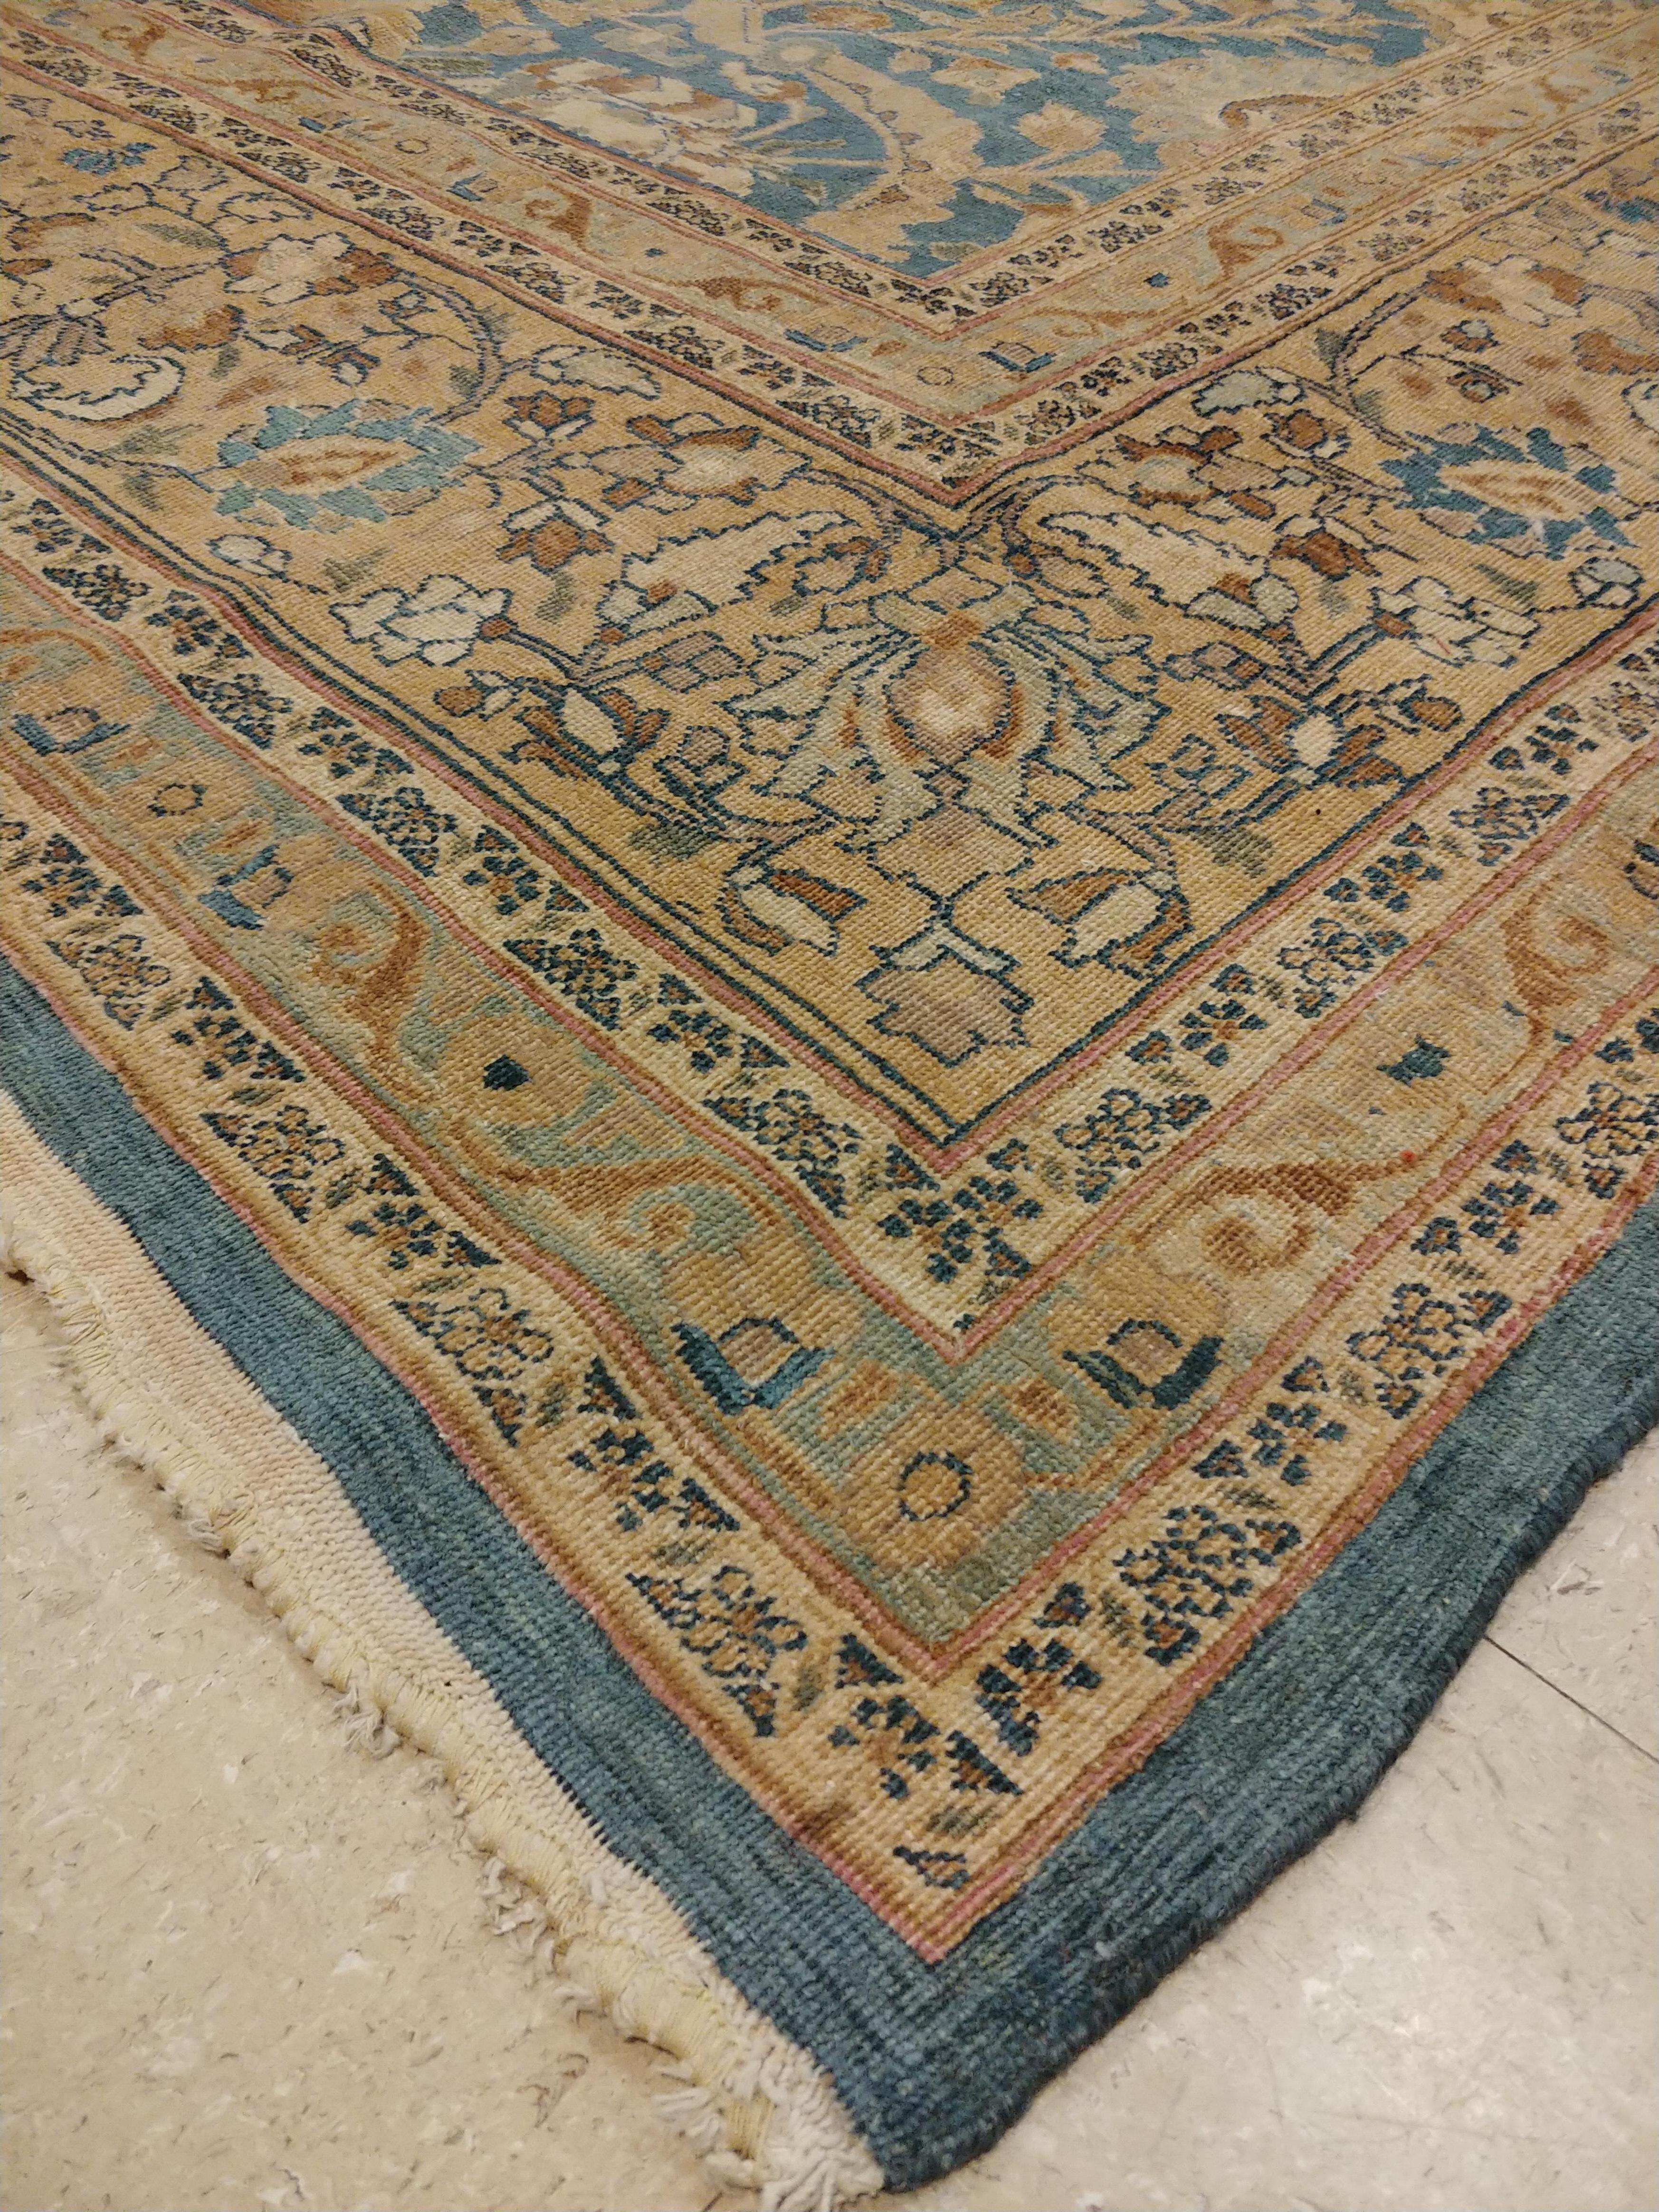 Mashad rugs, also known as Meshad carpets, are renowned for their exquisite craftsmanship and intricate designs. These Persian rugs have a rich history that dates back centuries, with the 19th century being a particularly significant period for